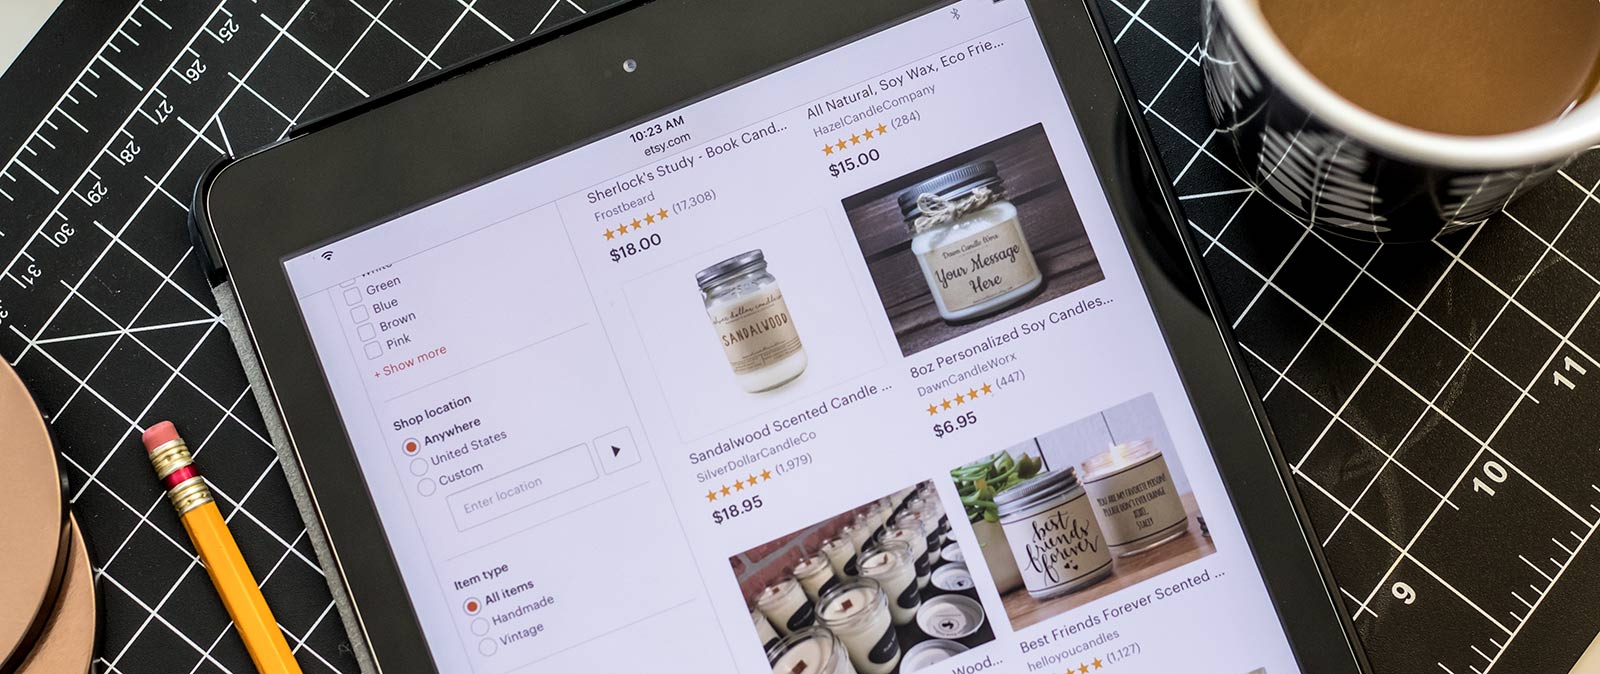 Tablet showing an Etsy website selling candles